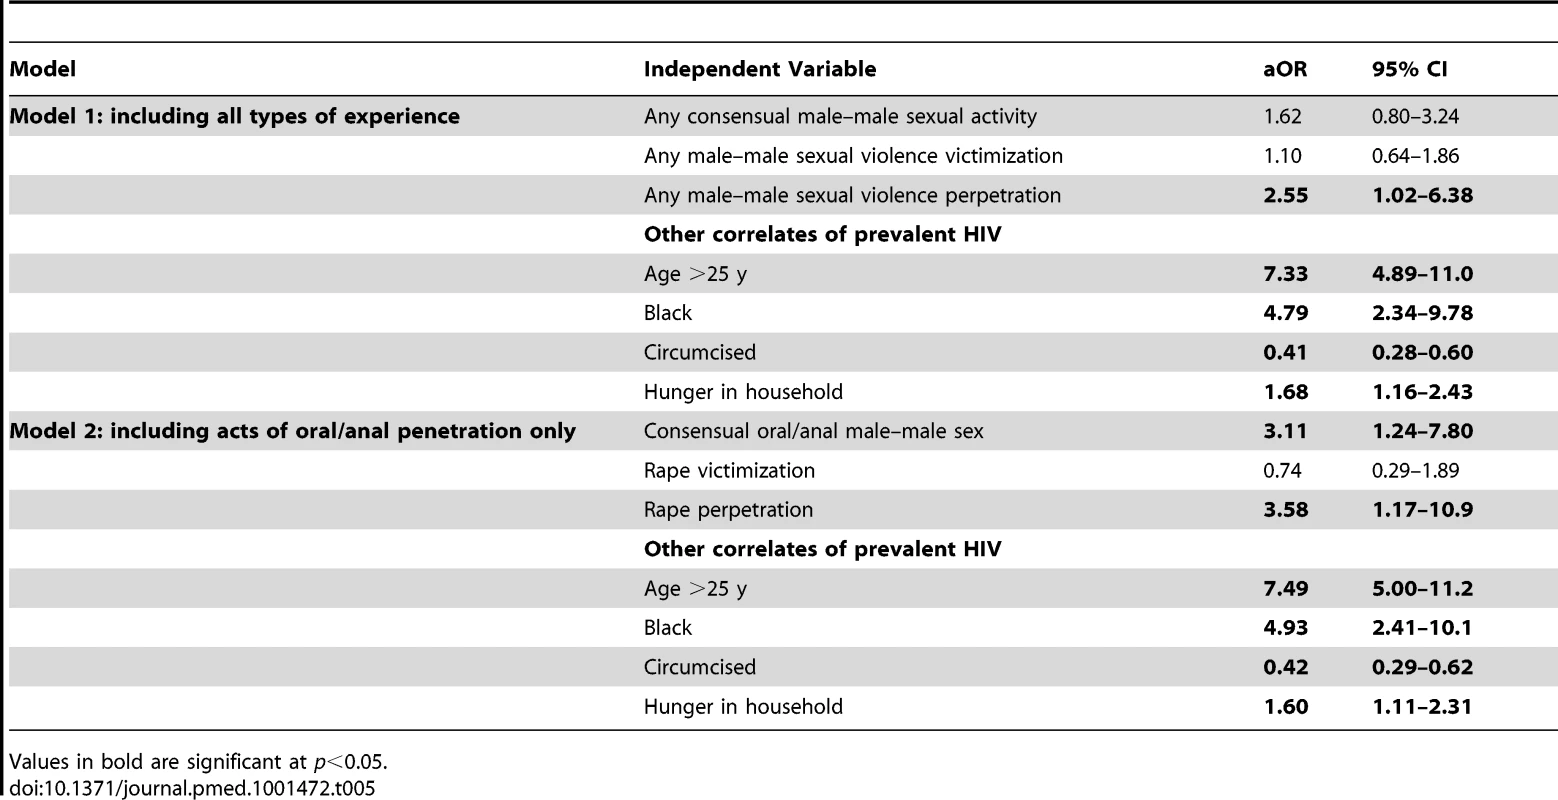 Multivariable logistic regression models for prevalent HIV infection showing adjusted odds ratios for consensual male–male sex, sexual violence victimization, and sexual violence perpetration.